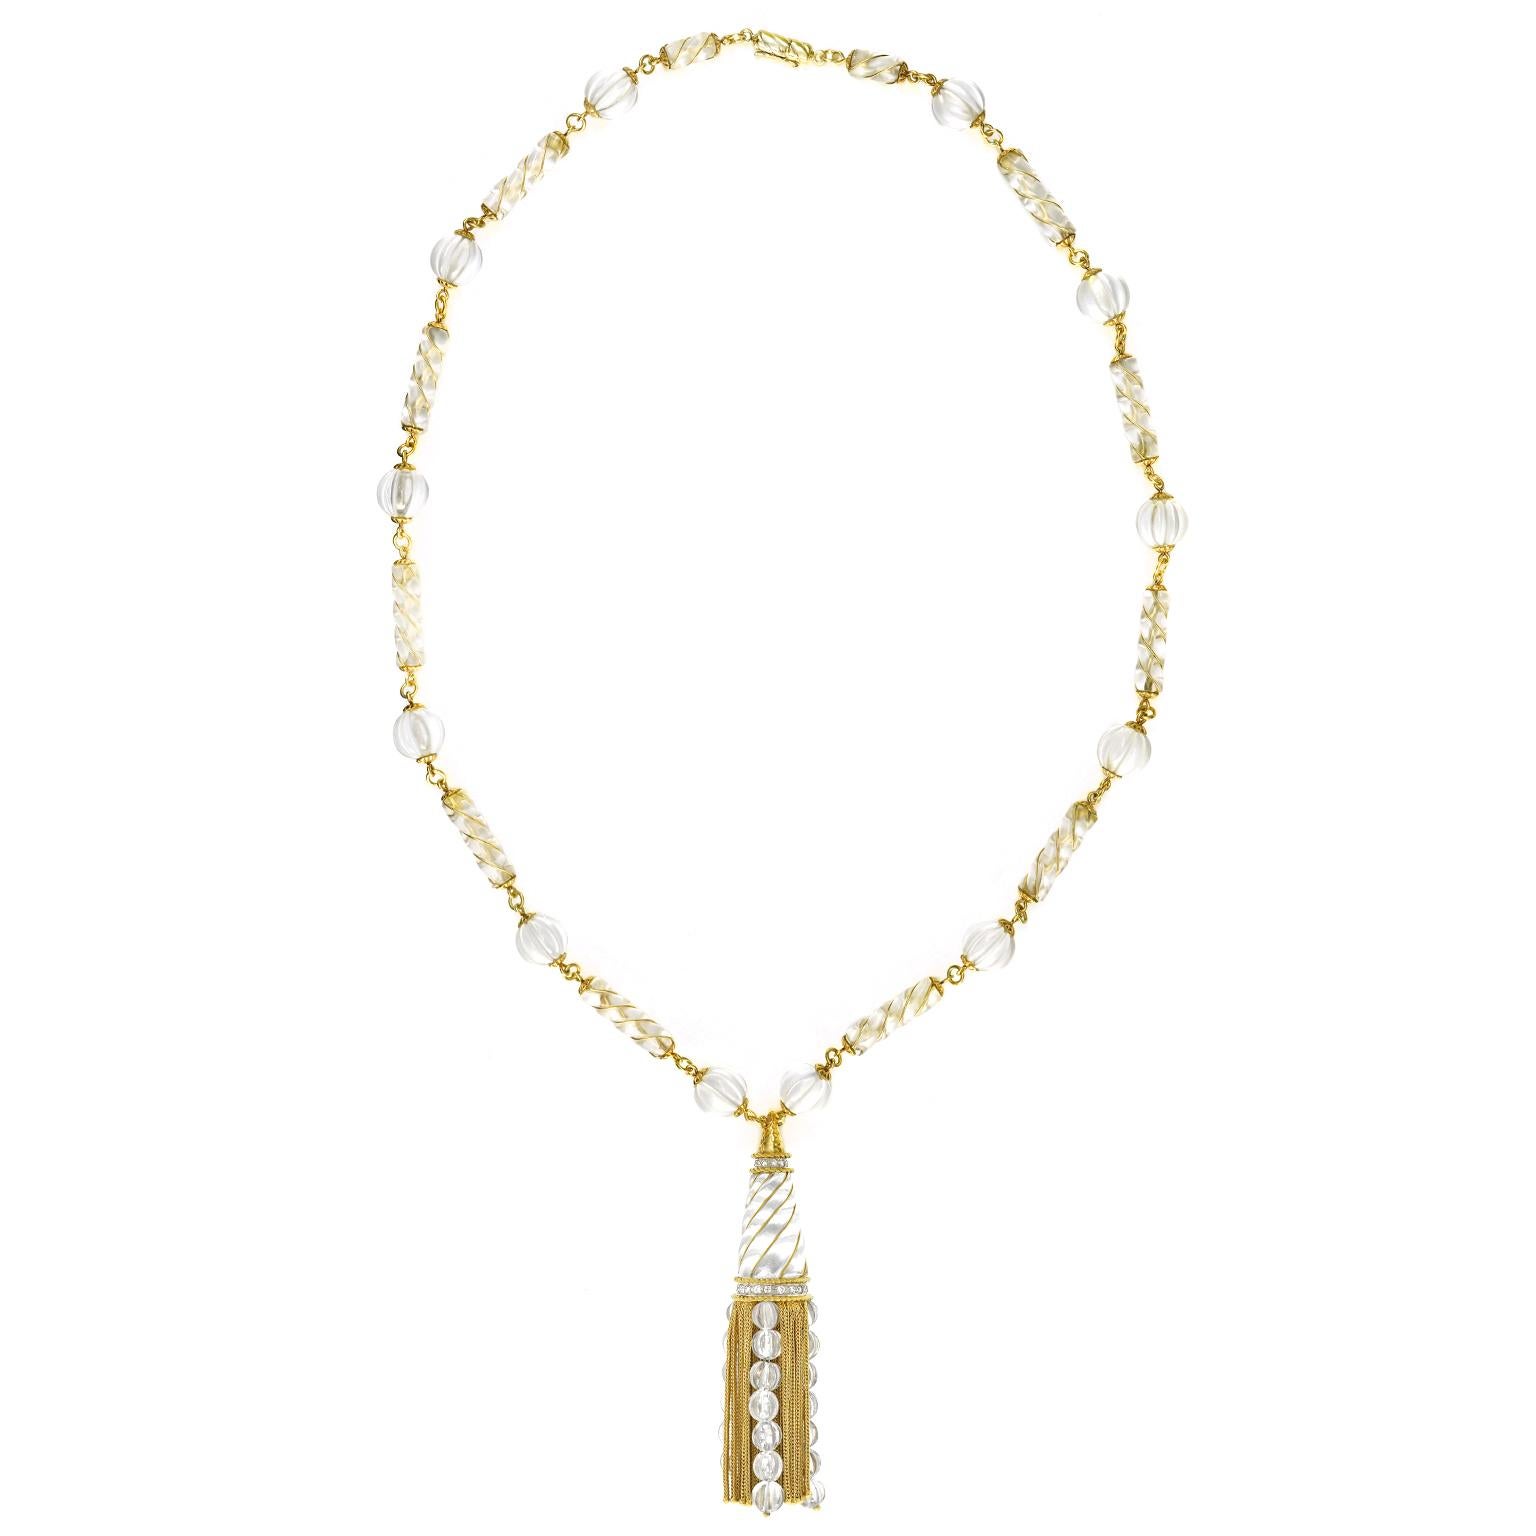 Cabochon Rock Crystal and Gold Tassel Necklace